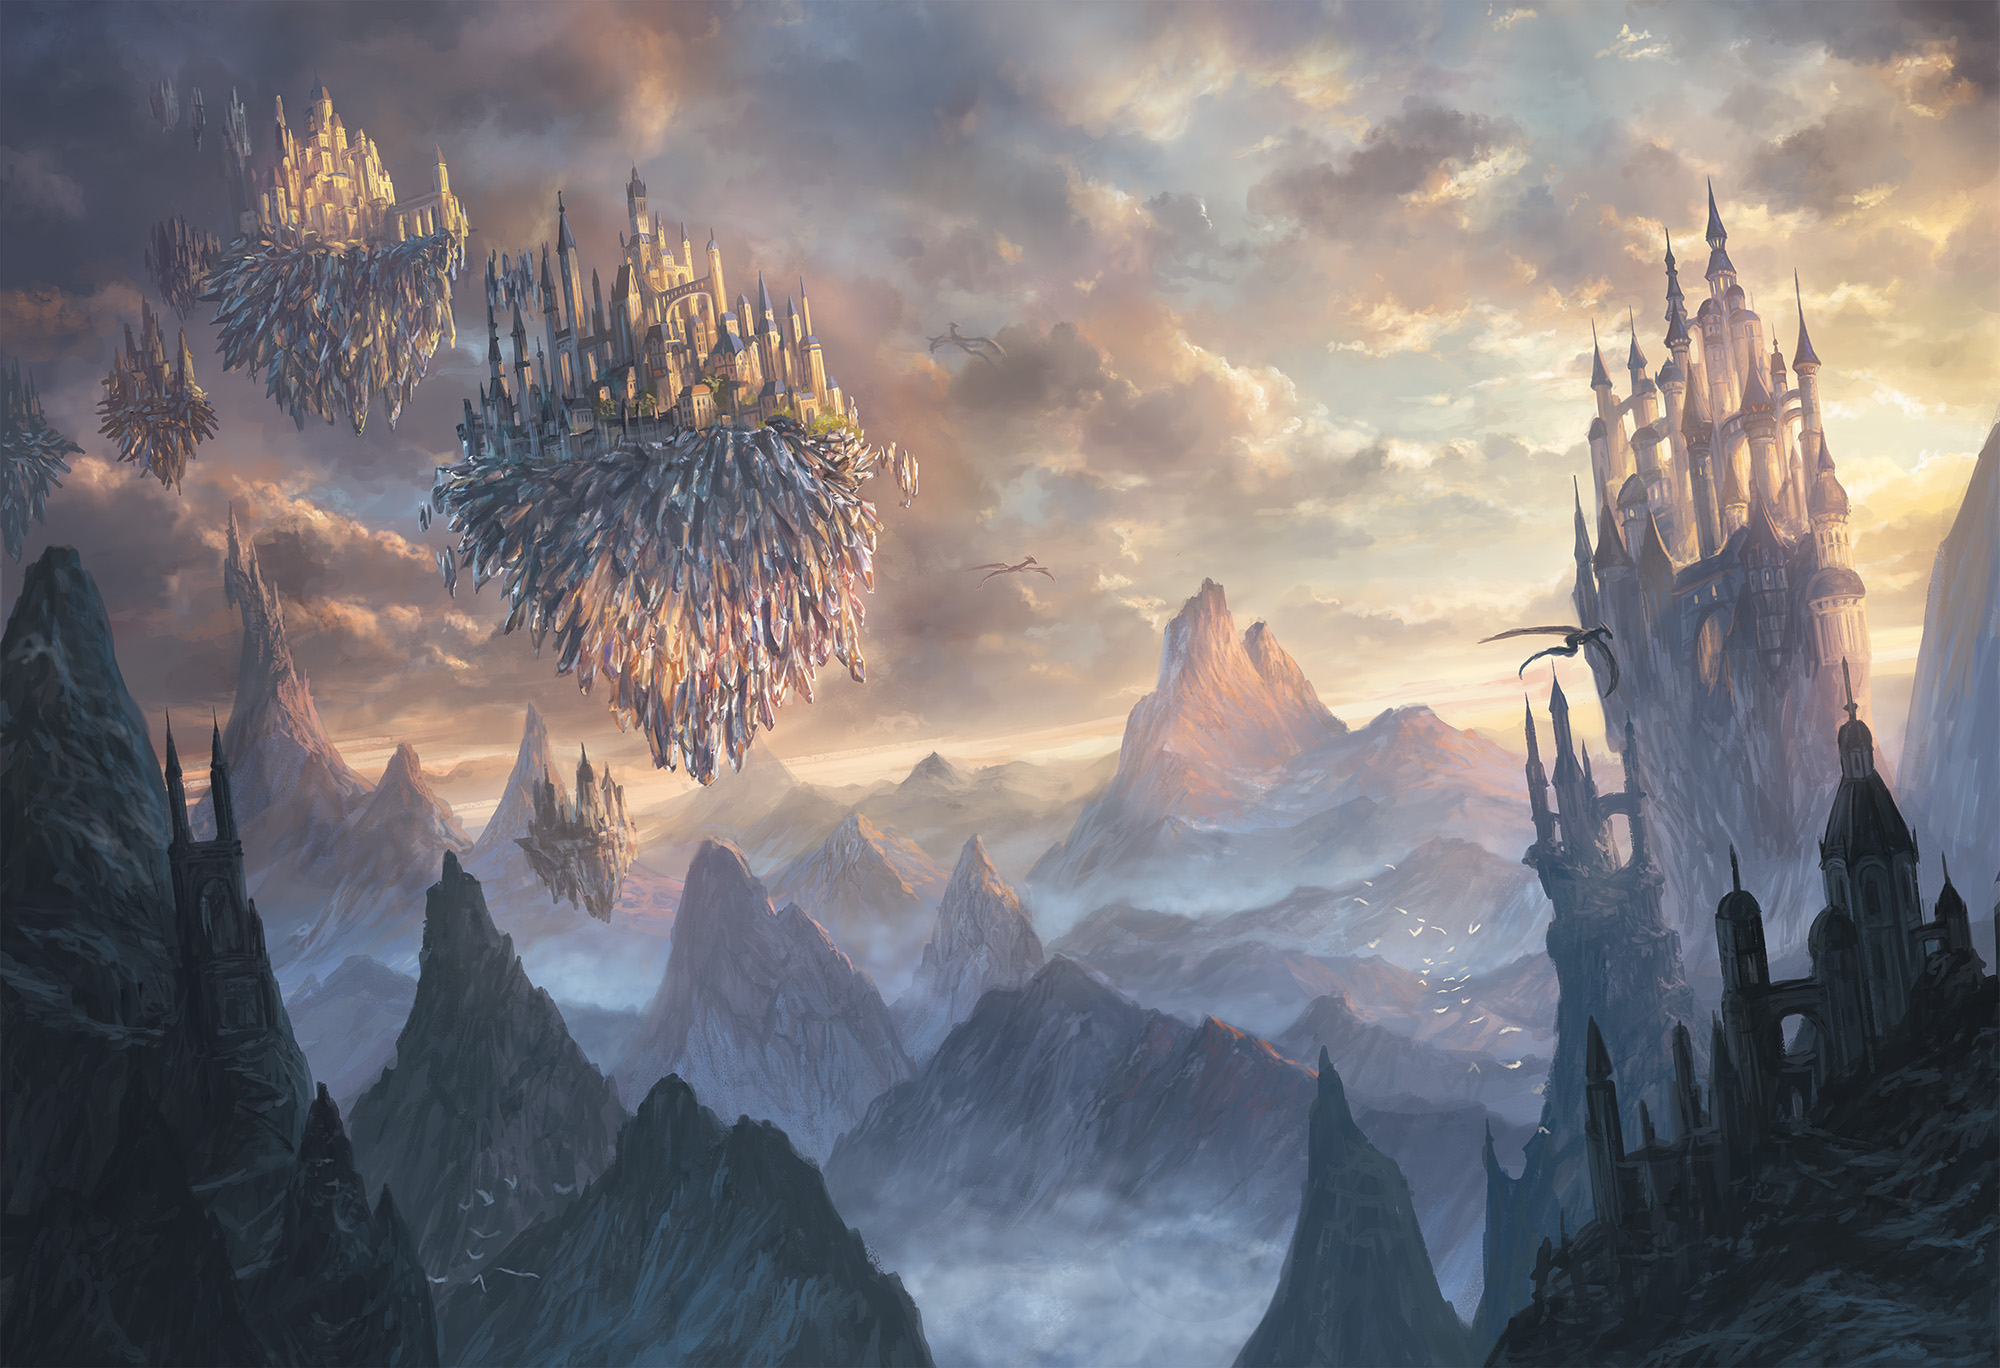 High mountain peaks with crystalline towers and floating crystal castles